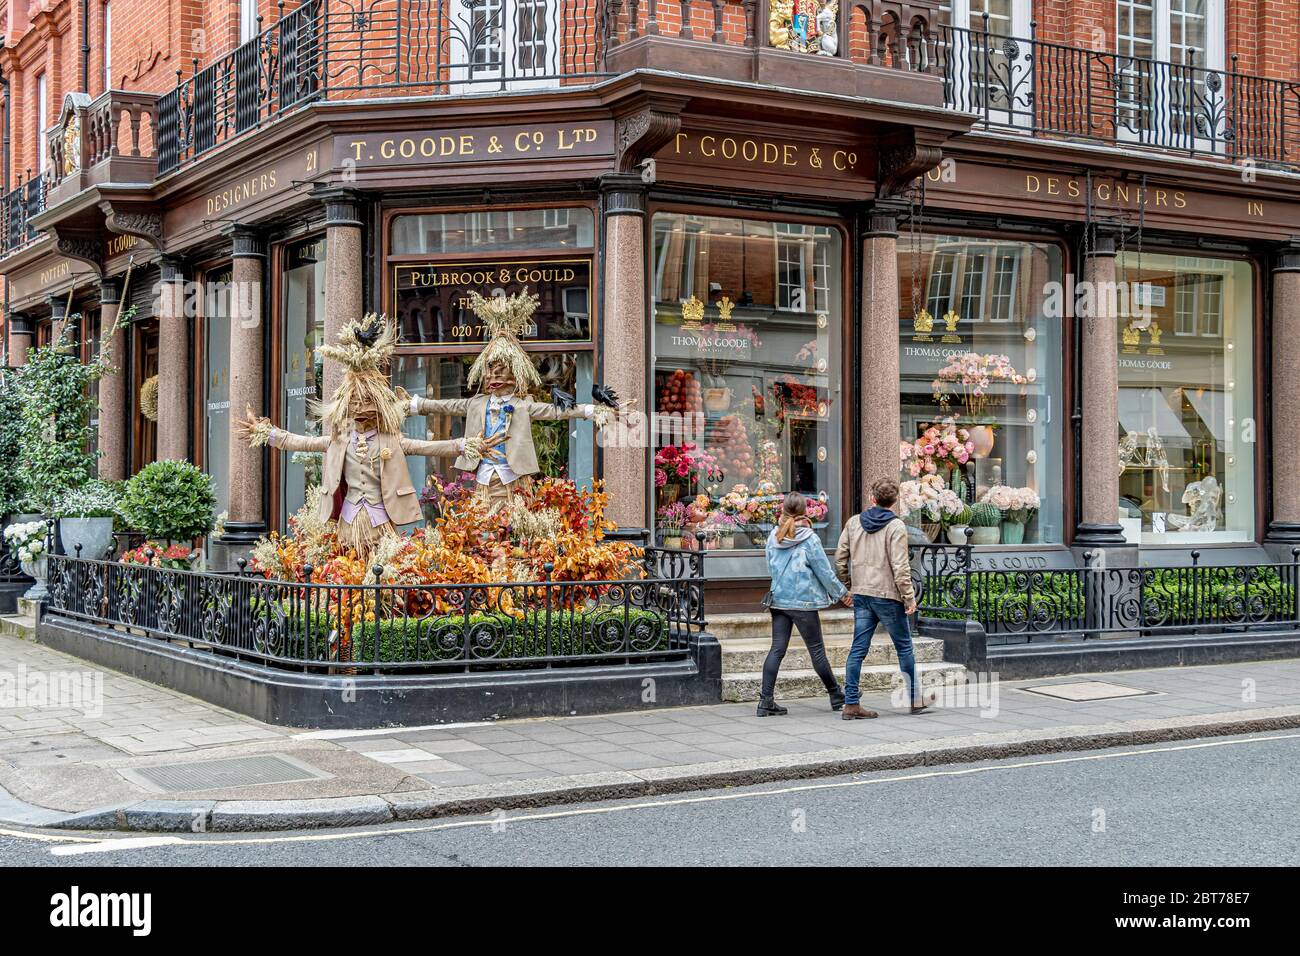 Two people walking past display of Scarecrows outside Thomas Goode & Co, a china, silverware and glass shop Mayfair, London Stock Photo